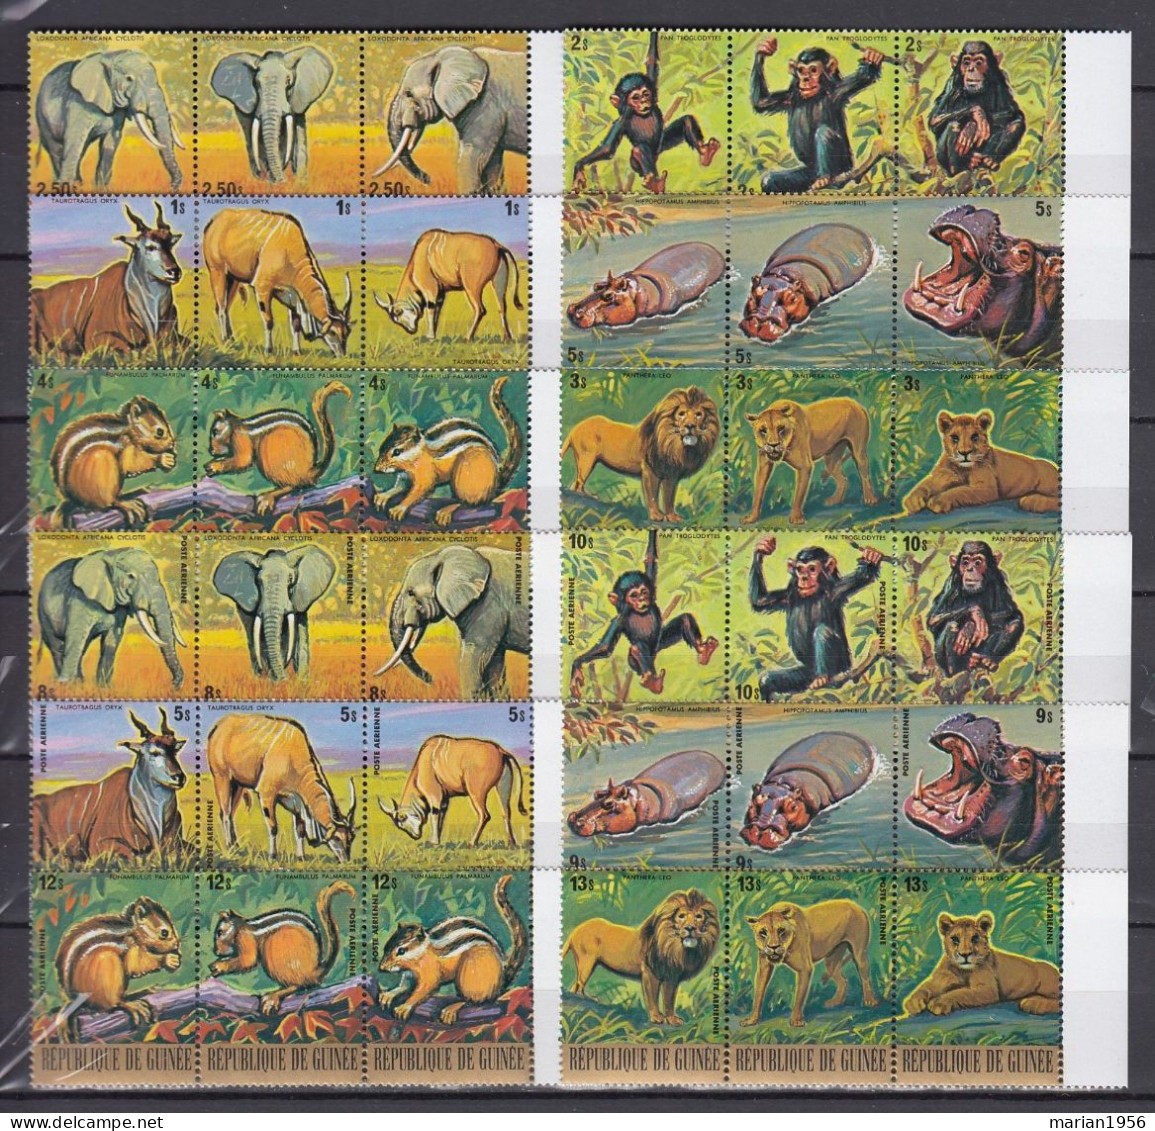 Guinea 1977 - DIVERS ANIMAUX - Complet - Michel 793/828 - 55,00 Eur. - MNH - Other & Unclassified